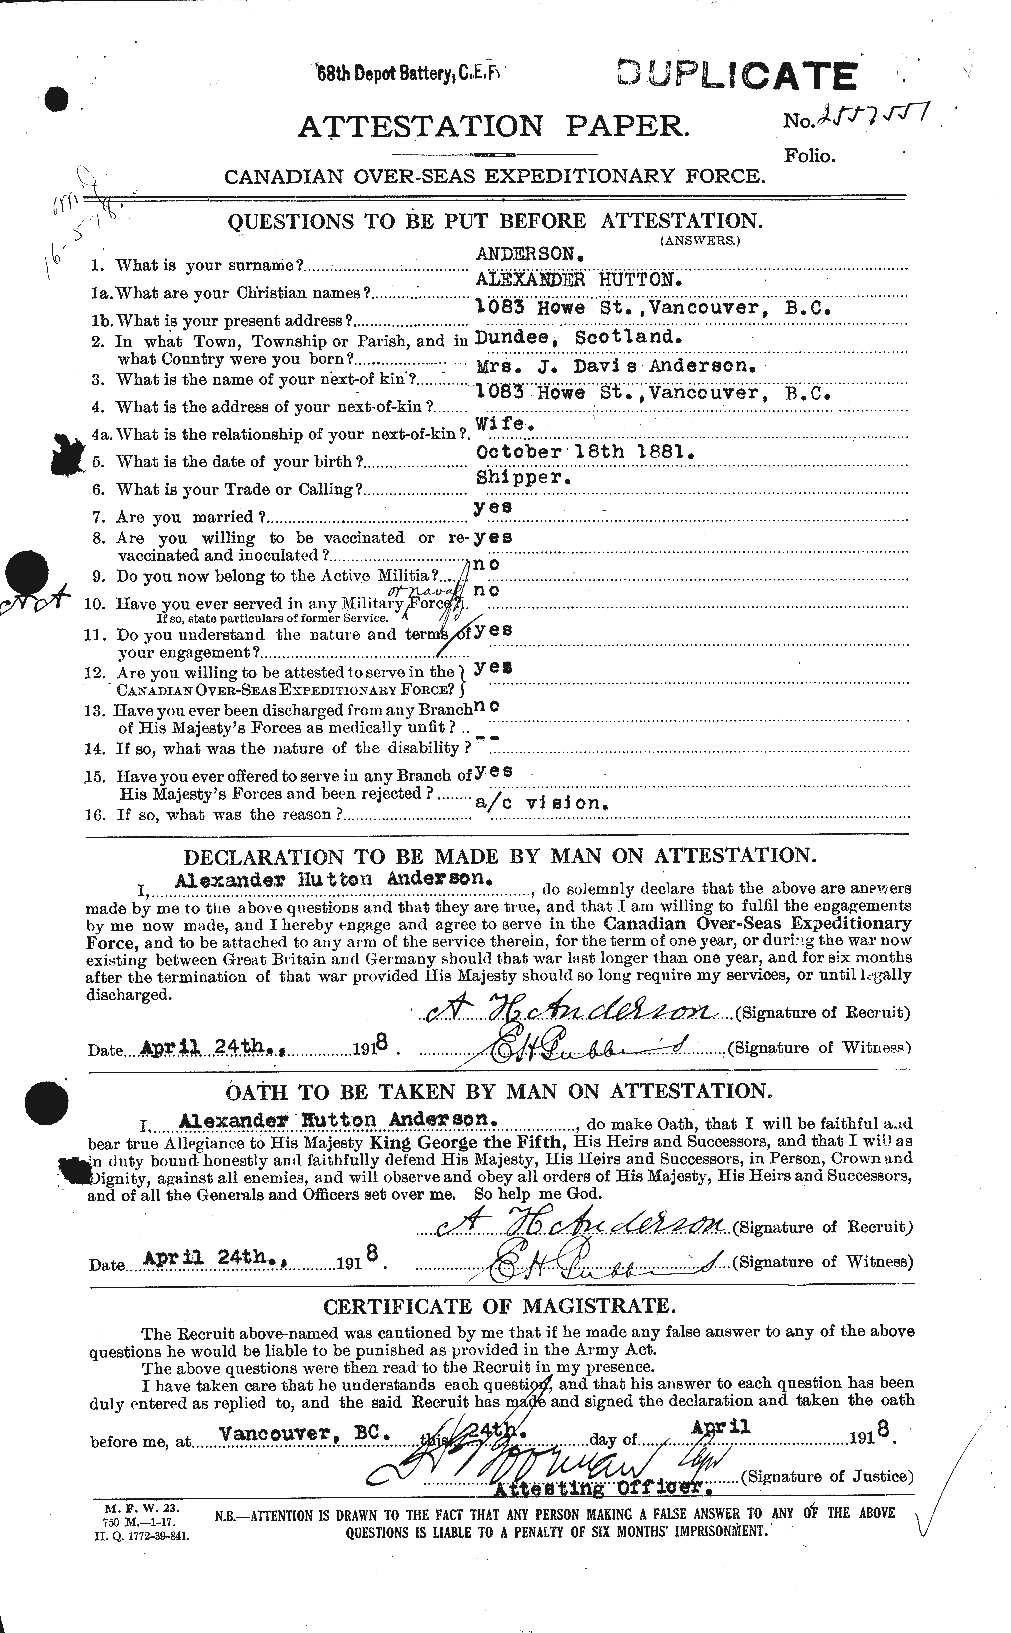 Personnel Records of the First World War - CEF 209487a